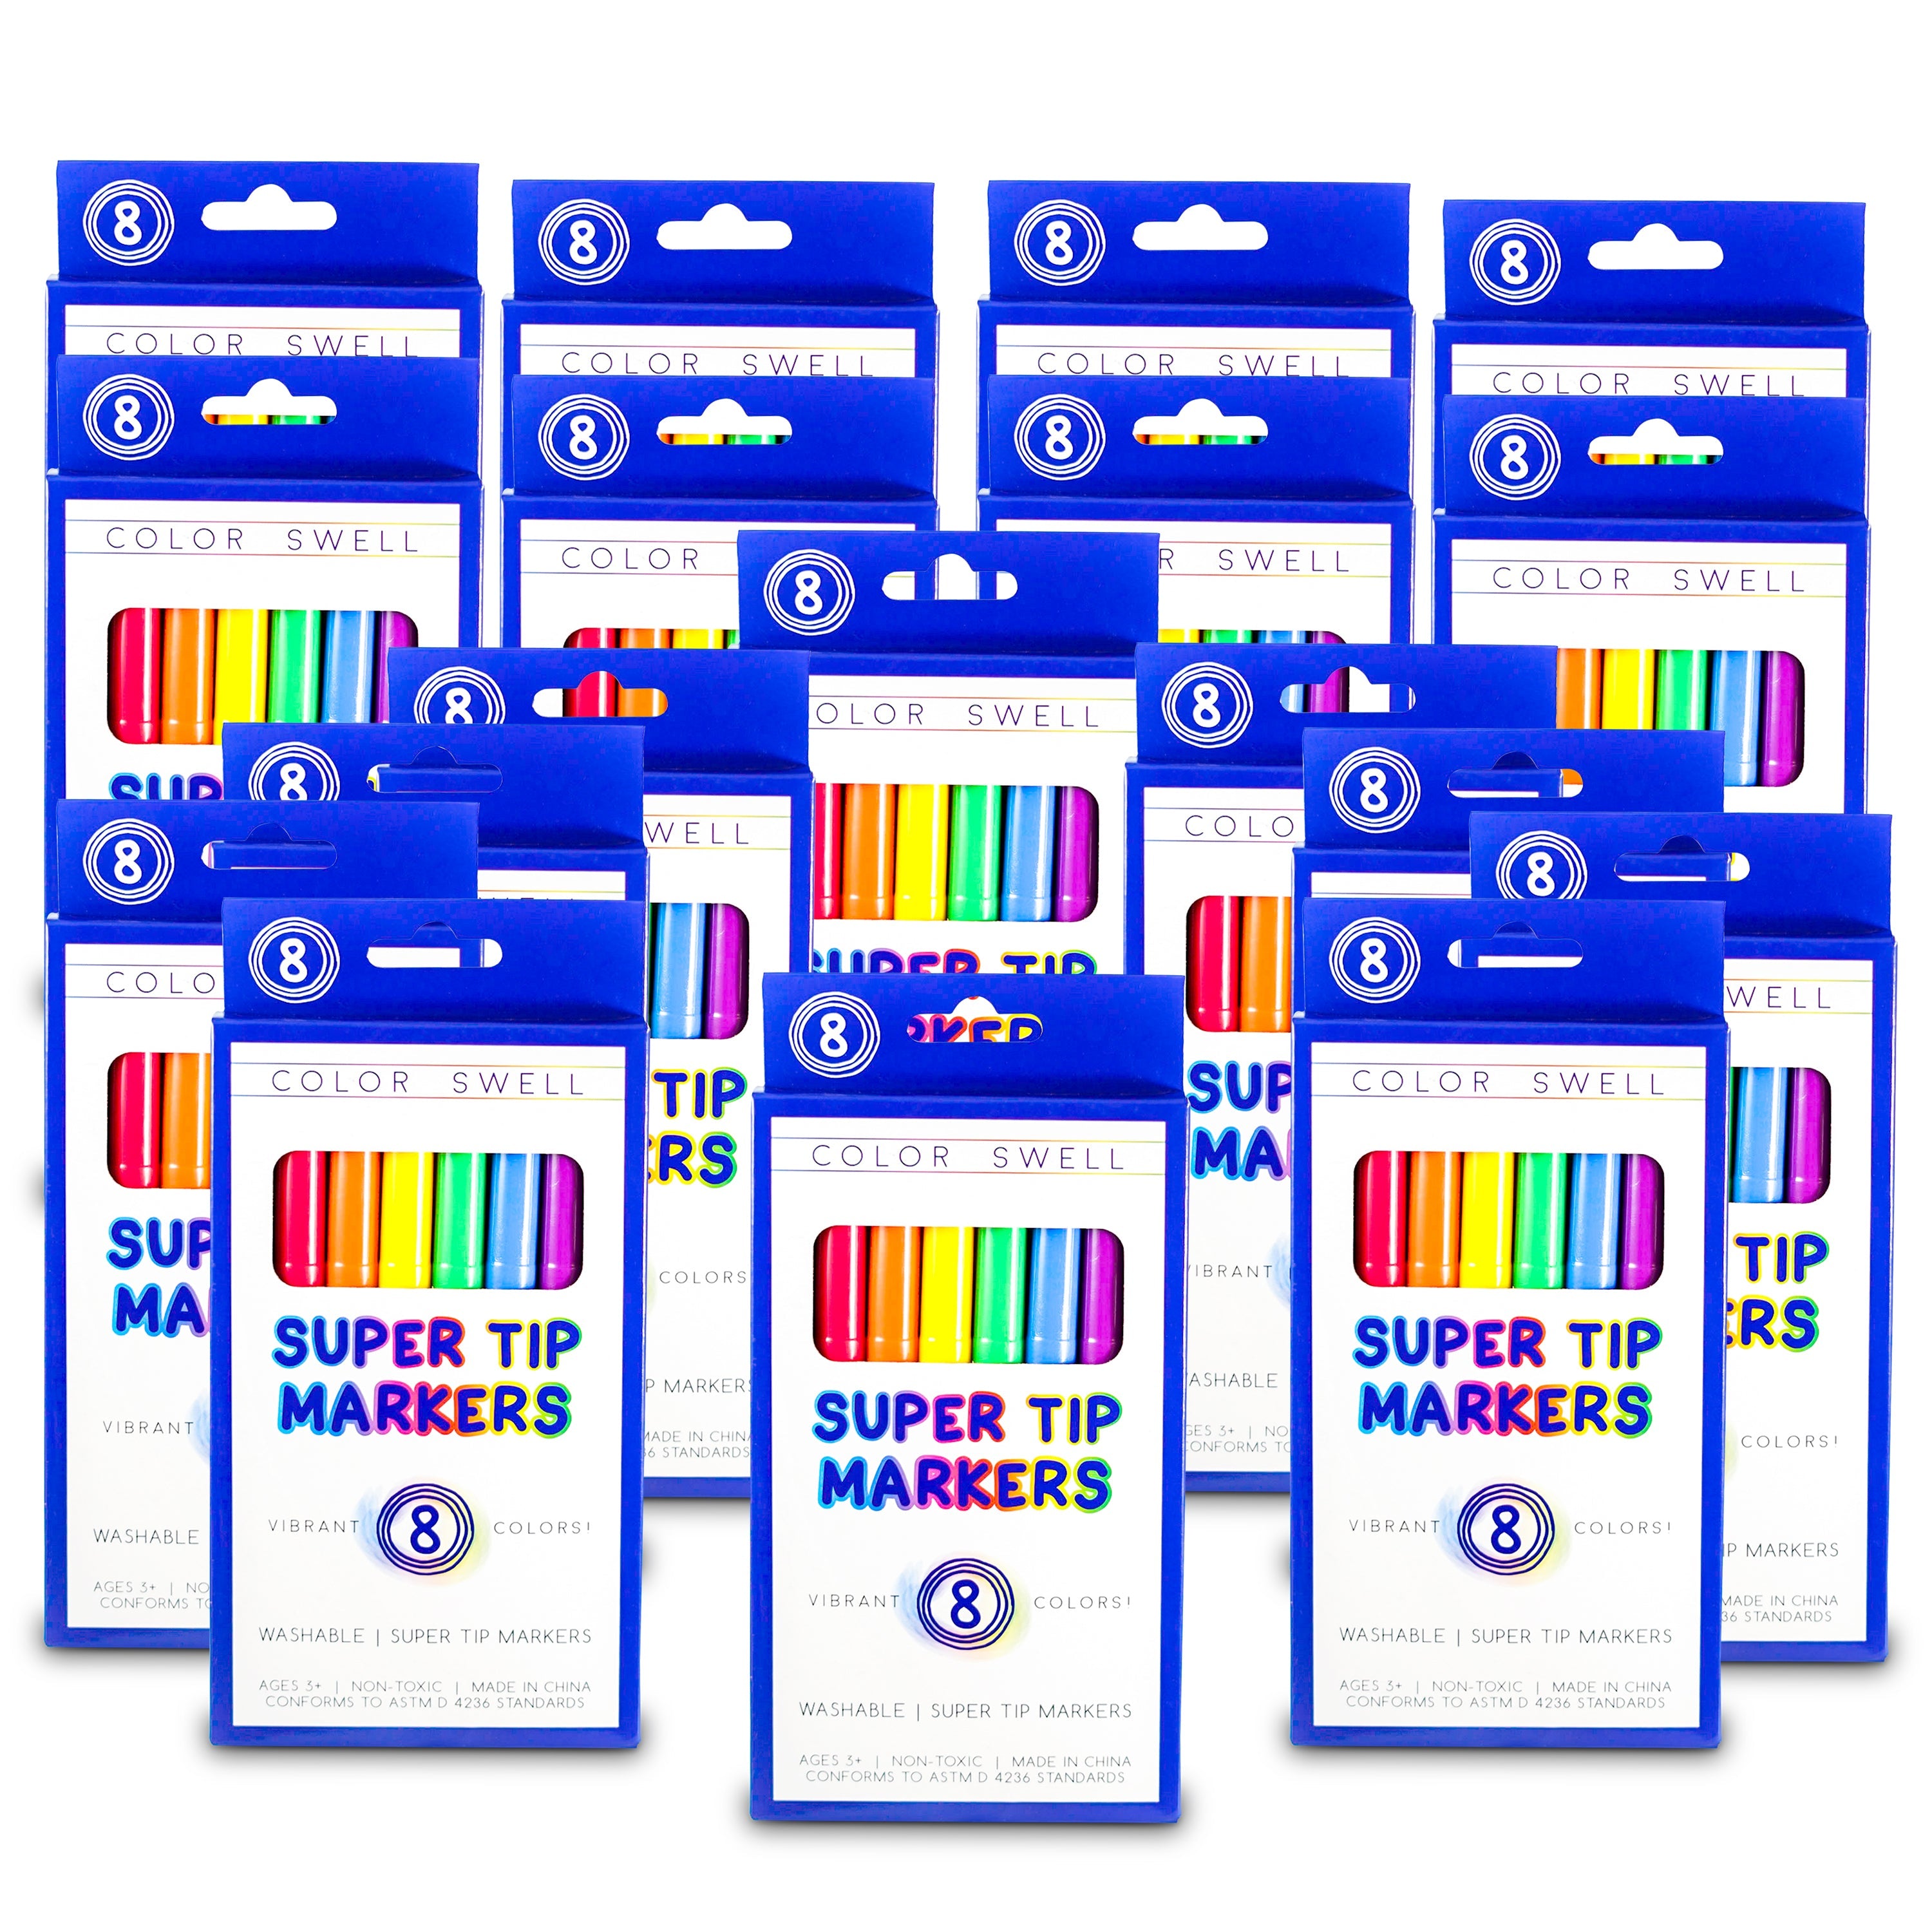 Color Swell Super Tip Washable Markers Bulk Pack 36 Boxes of 8 Vibrant Colors (288 total)